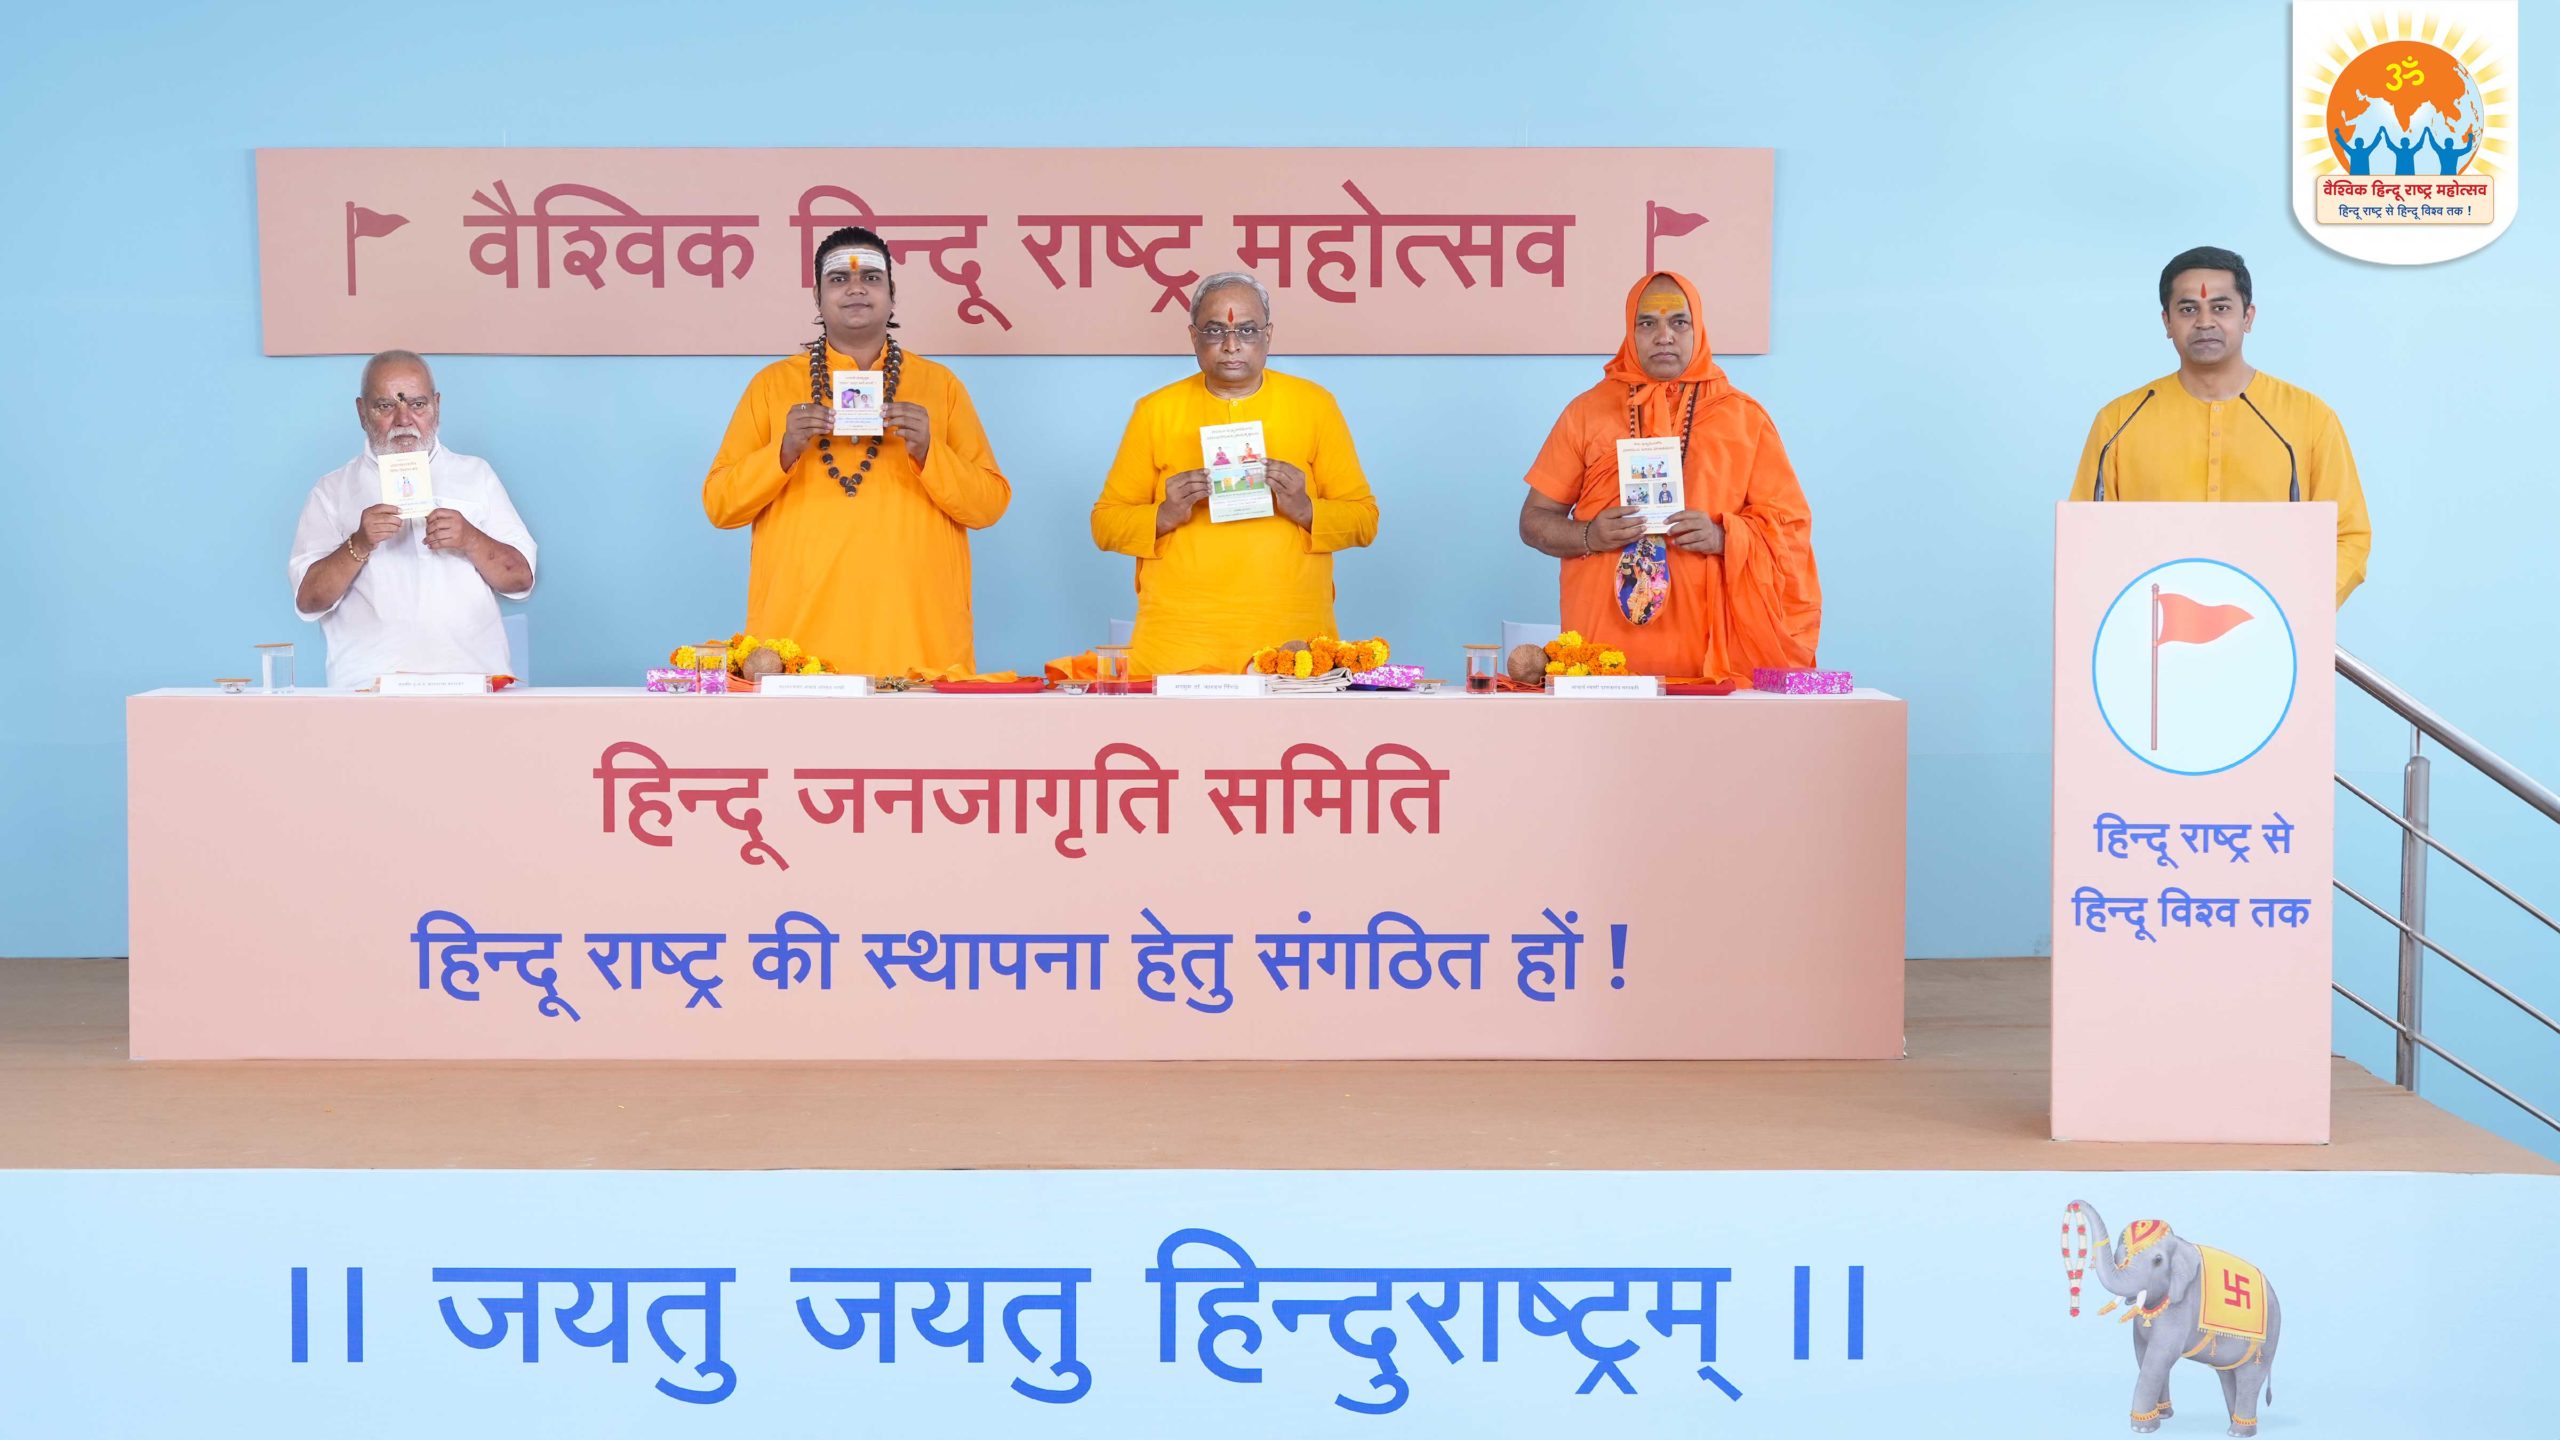 Saints releasing Marathi Booklet - 'Taking care of Patients as part of Spiritual Practice', Telugu Texts - 'Atonements to eliminate the harmful effects of sins' and 'Merits-demerits - Types and effects', and Marathi Booklet - 'Knowledge about the various facets of the science of Spirituality'.